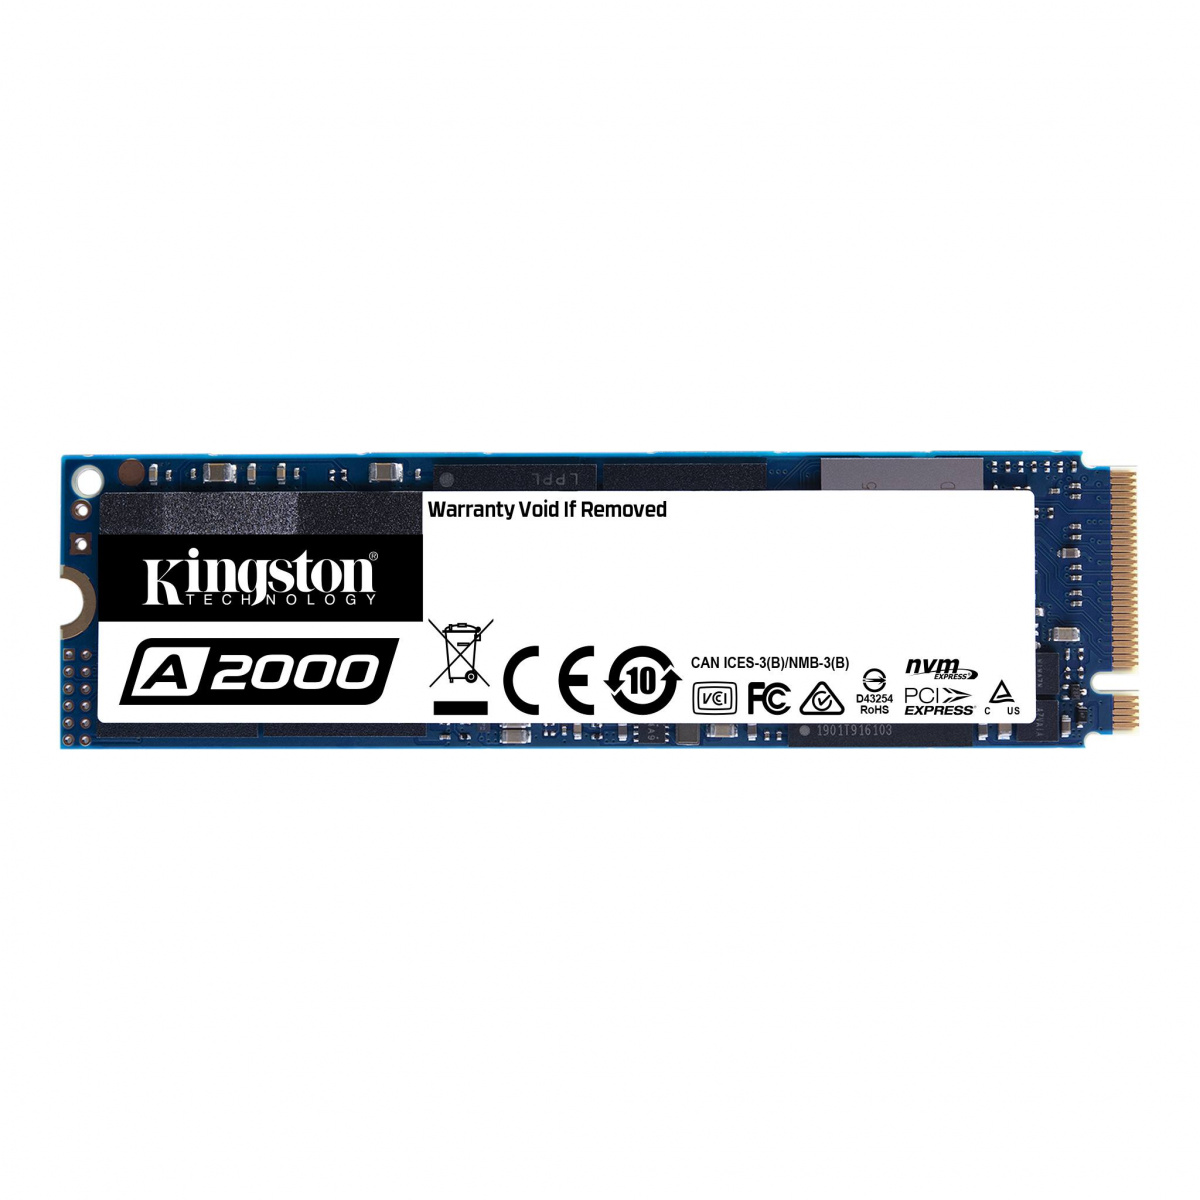 SSD 1000GB Kingston A2000 M.2 2280 NVMe Read/Write up 2200/2000MB/s, 4K Read/Write up to 250,000/220,000 IOPS [SA2000M8/1000]